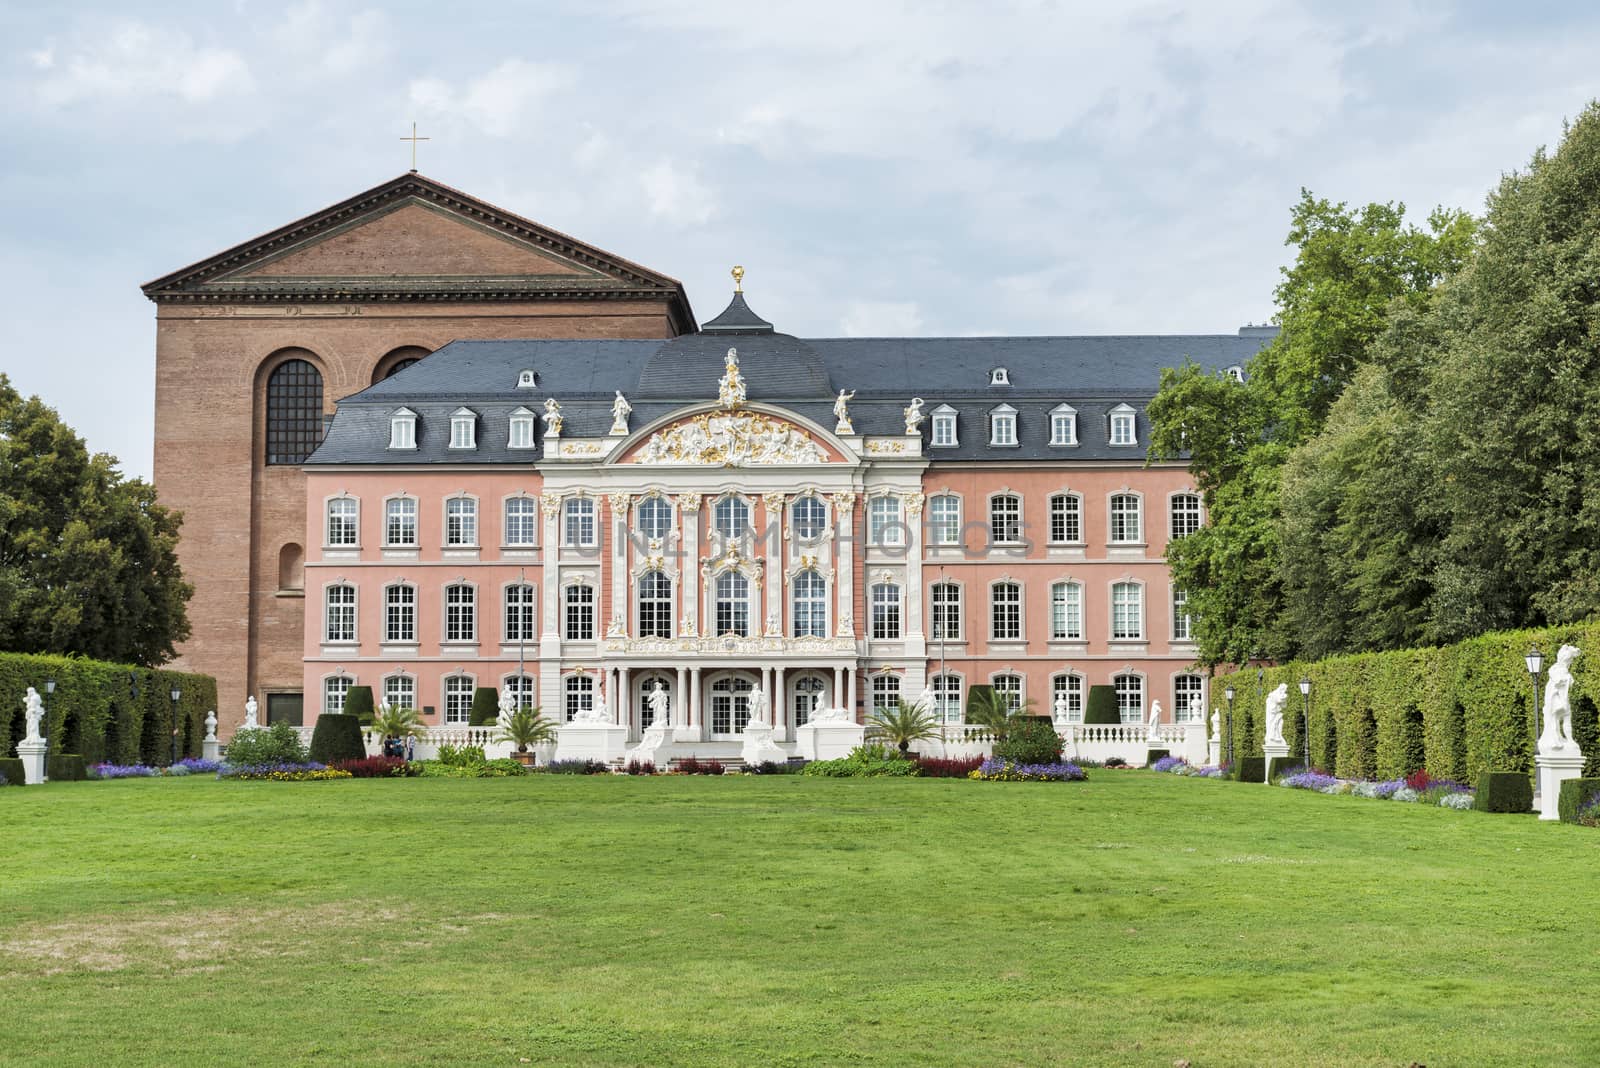 The Electoral Palace in Trier in Germany directly next to the Basilika is considered one of the most beautiful rococo palaces in the world. 